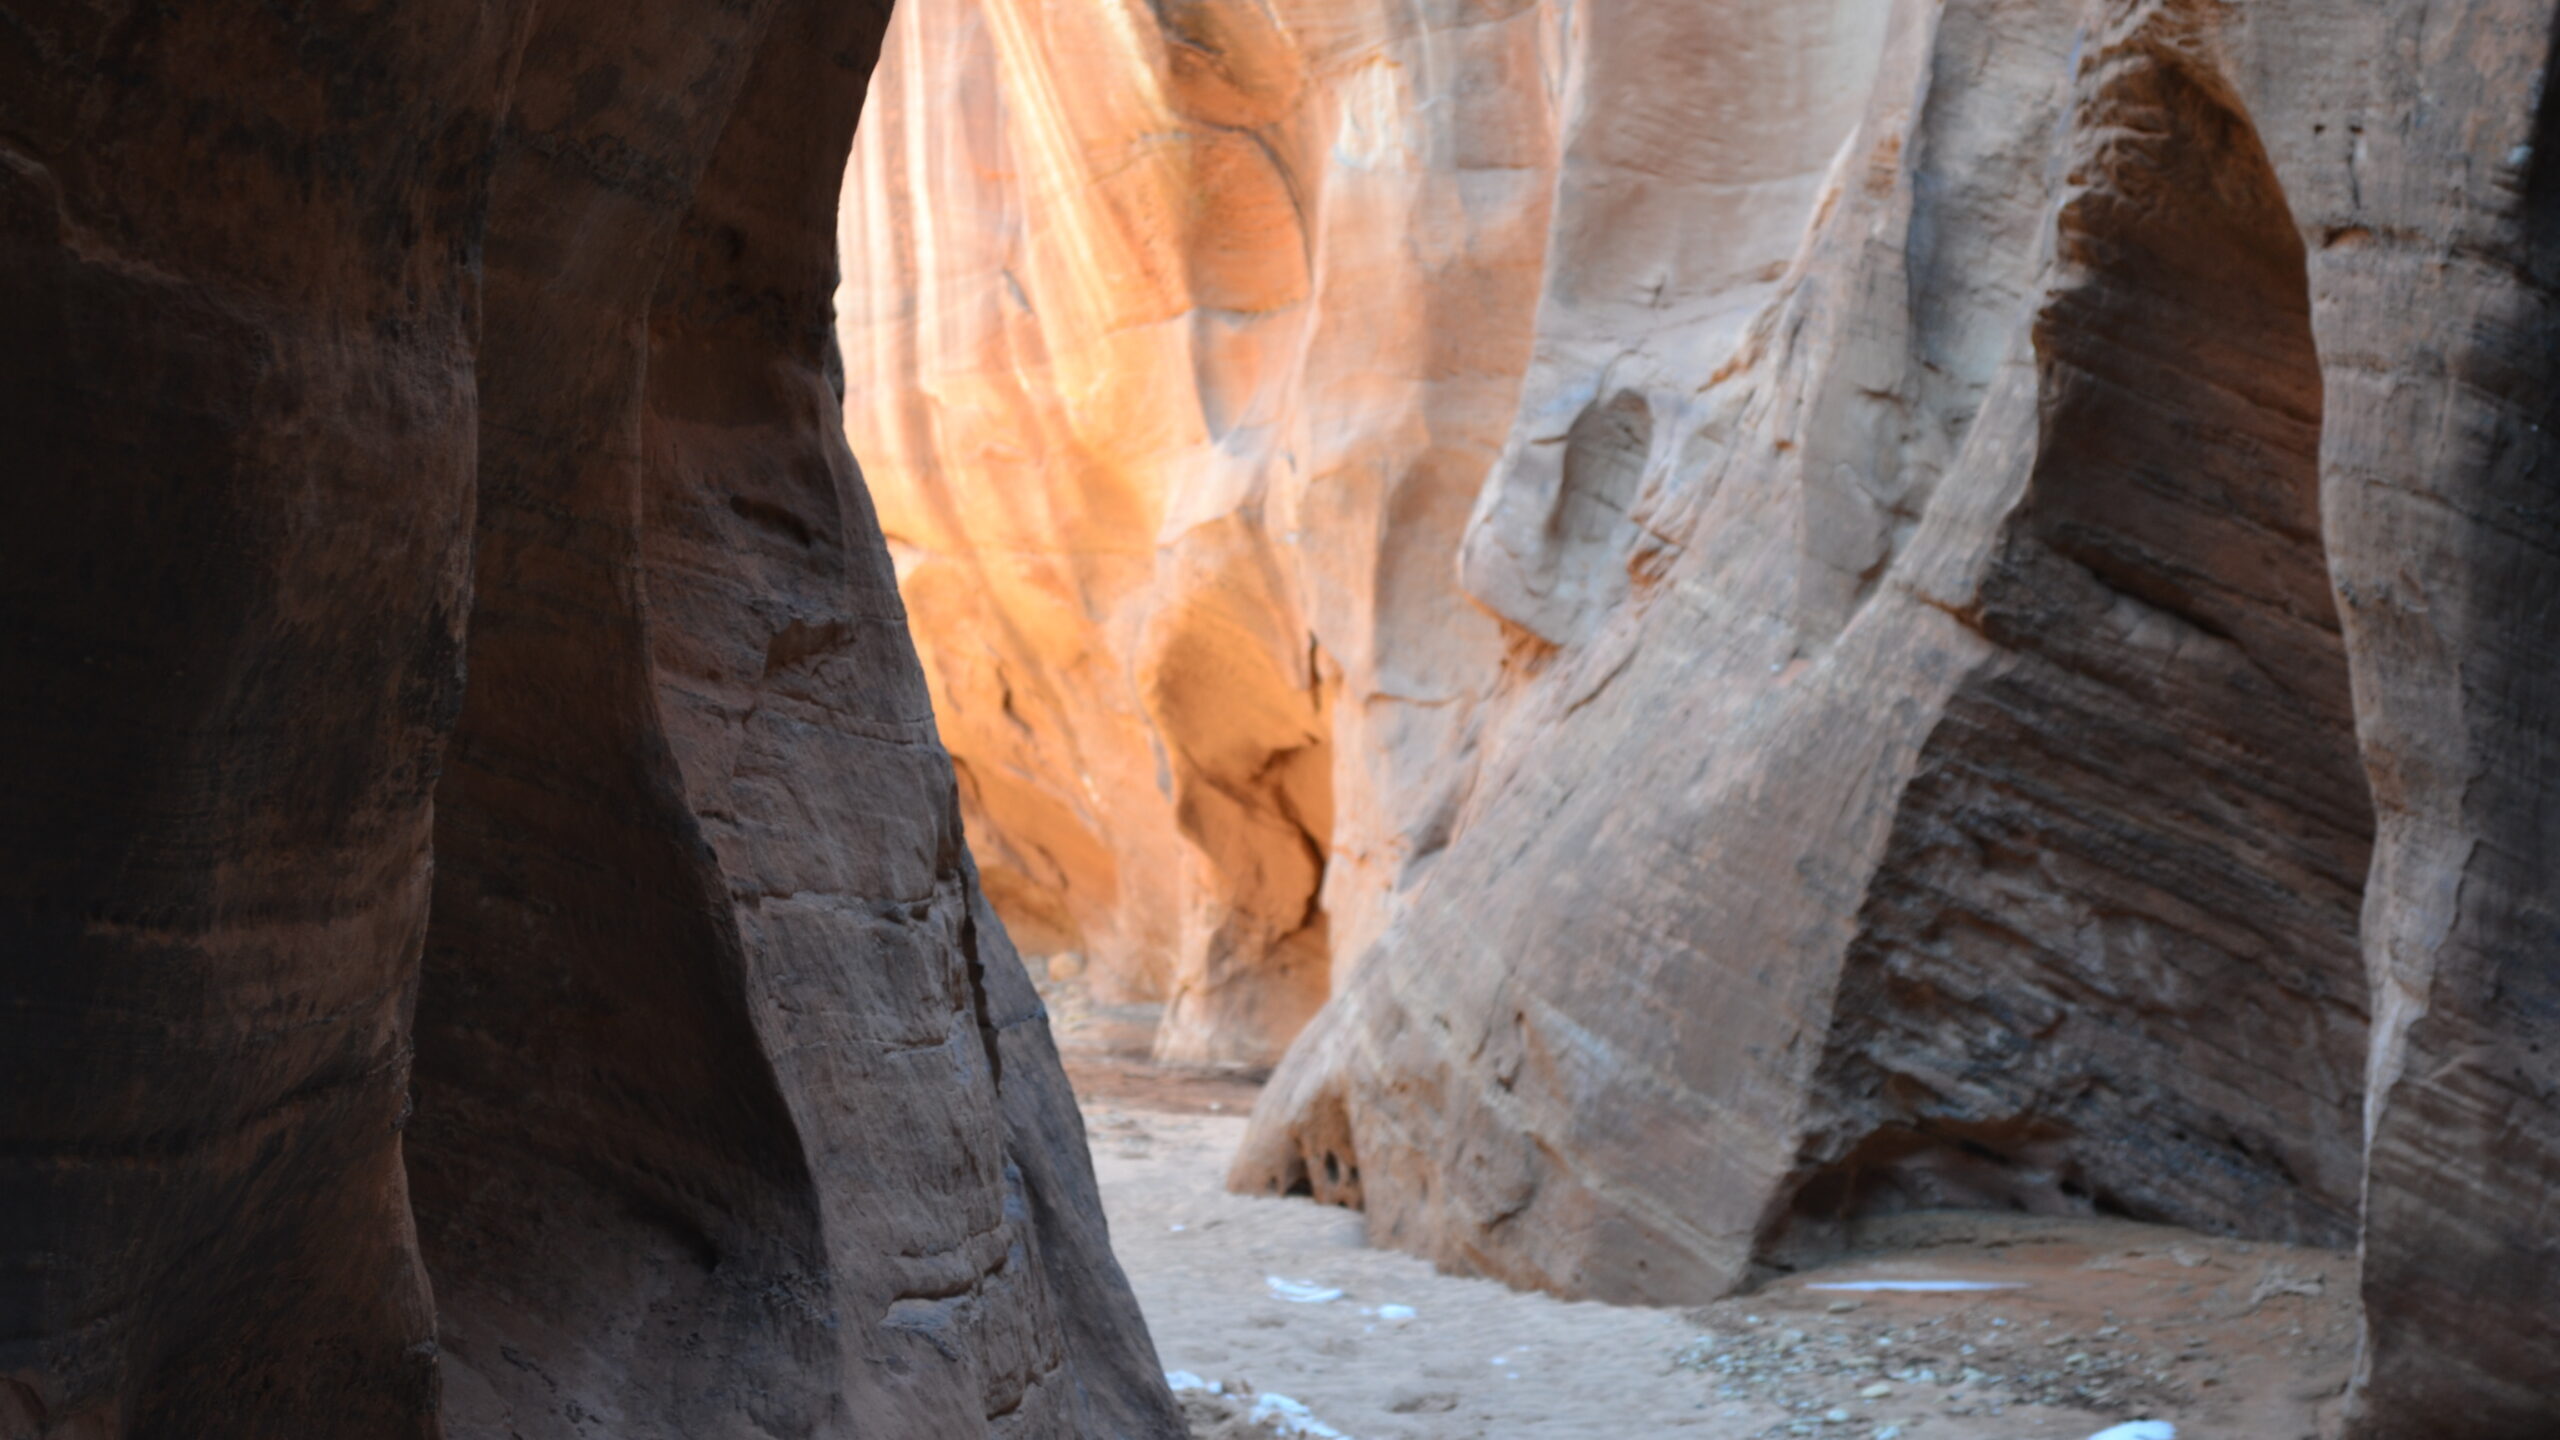 Buckskin Gulch, located in Kane County, has been the site of four fatalities in recent weeks due to...